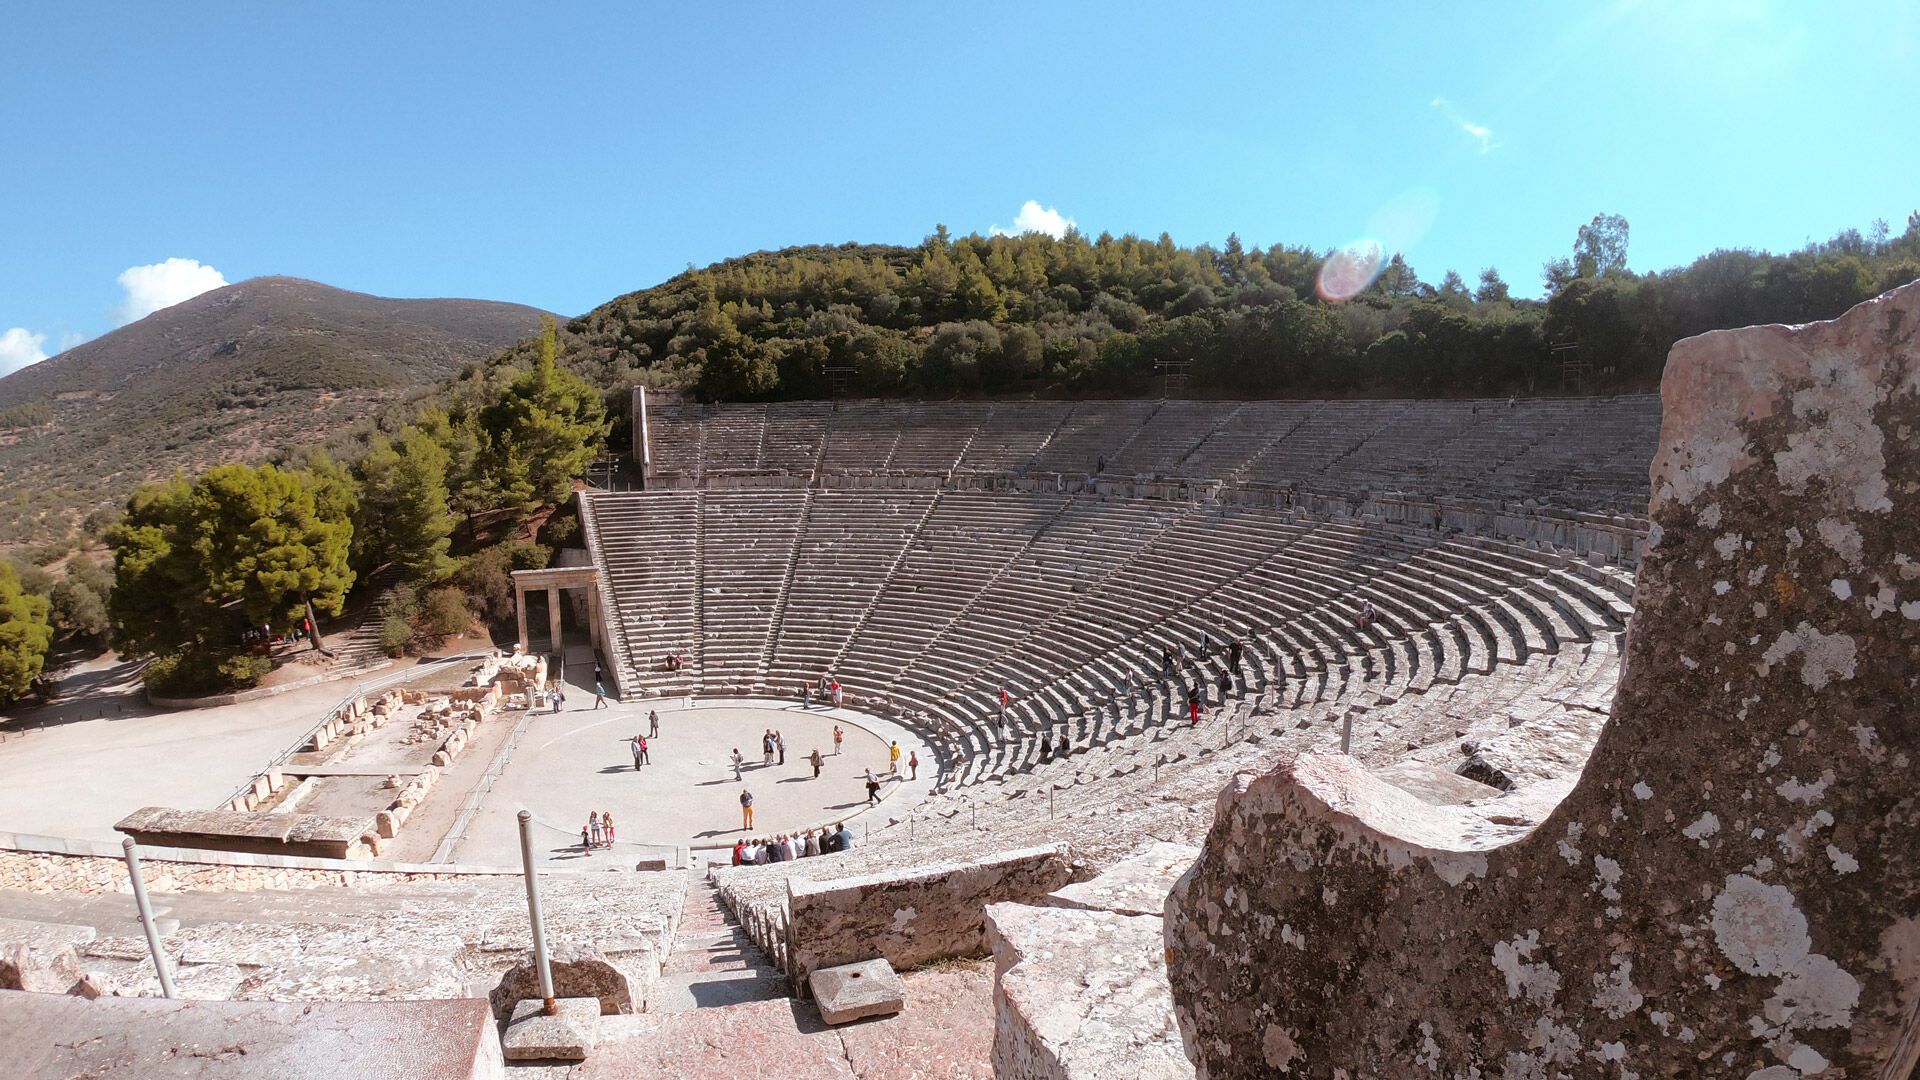 The famous theatre at Asclepius of Epidaurus is one of the most important monuments of ancient Greece